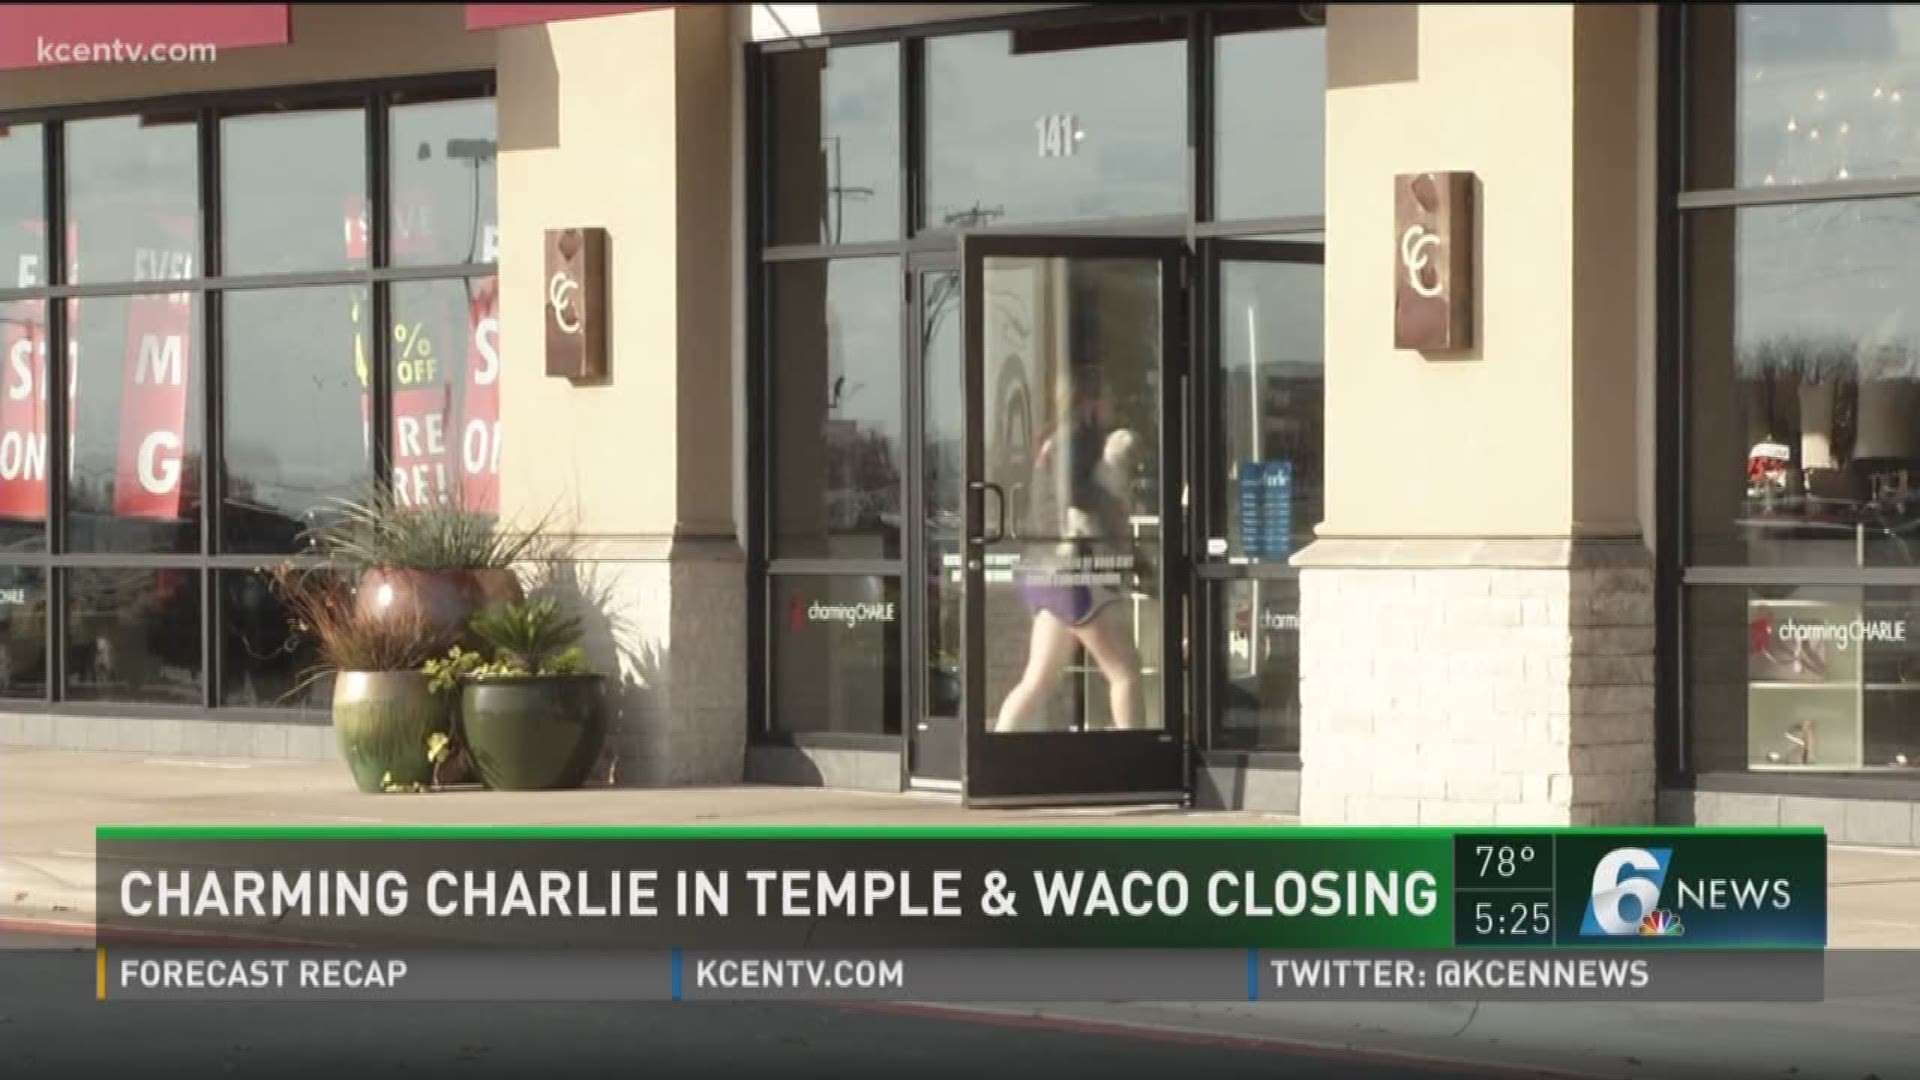 Fashion accessory store Charming Charlie is joining the list of retailers shutting down some of its stores, including the Waco and Temple locations.